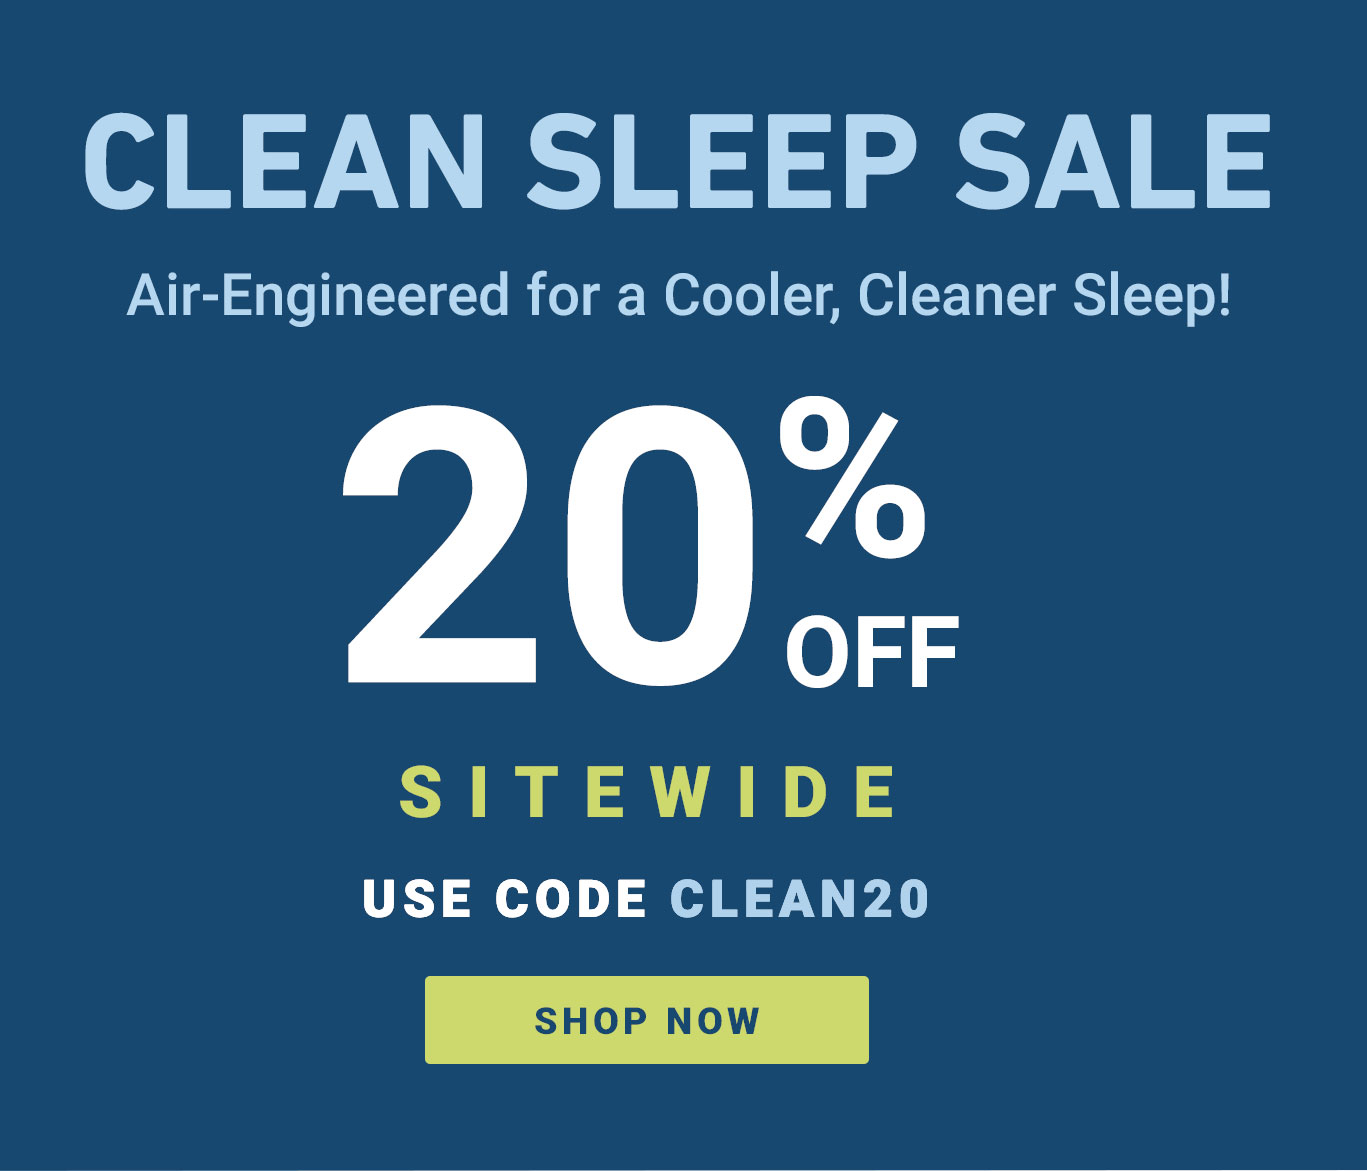 Save 25% OFF Sitewide with Code CLEAN20